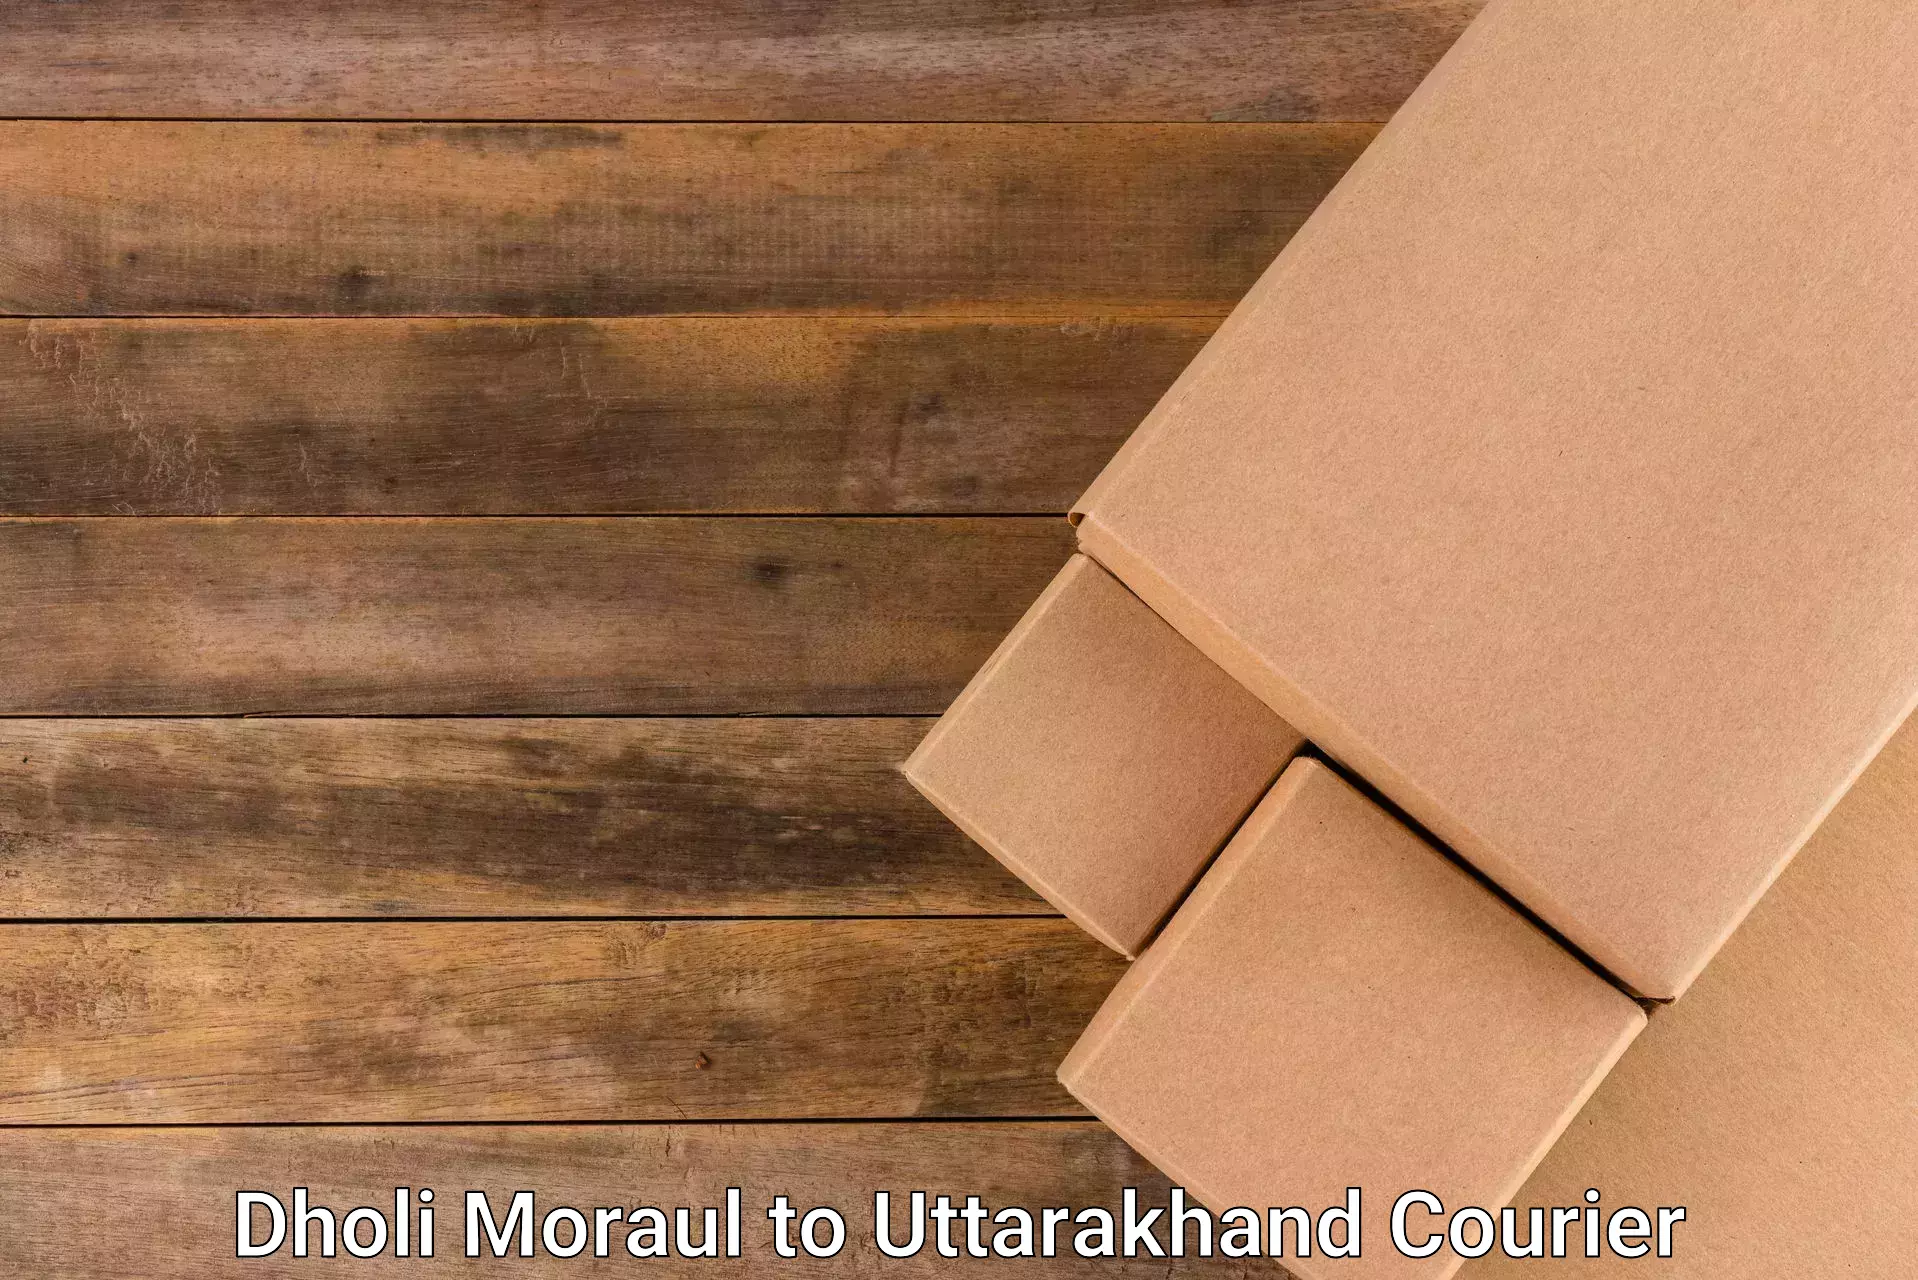 Full-service courier options Dholi Moraul to Tehri